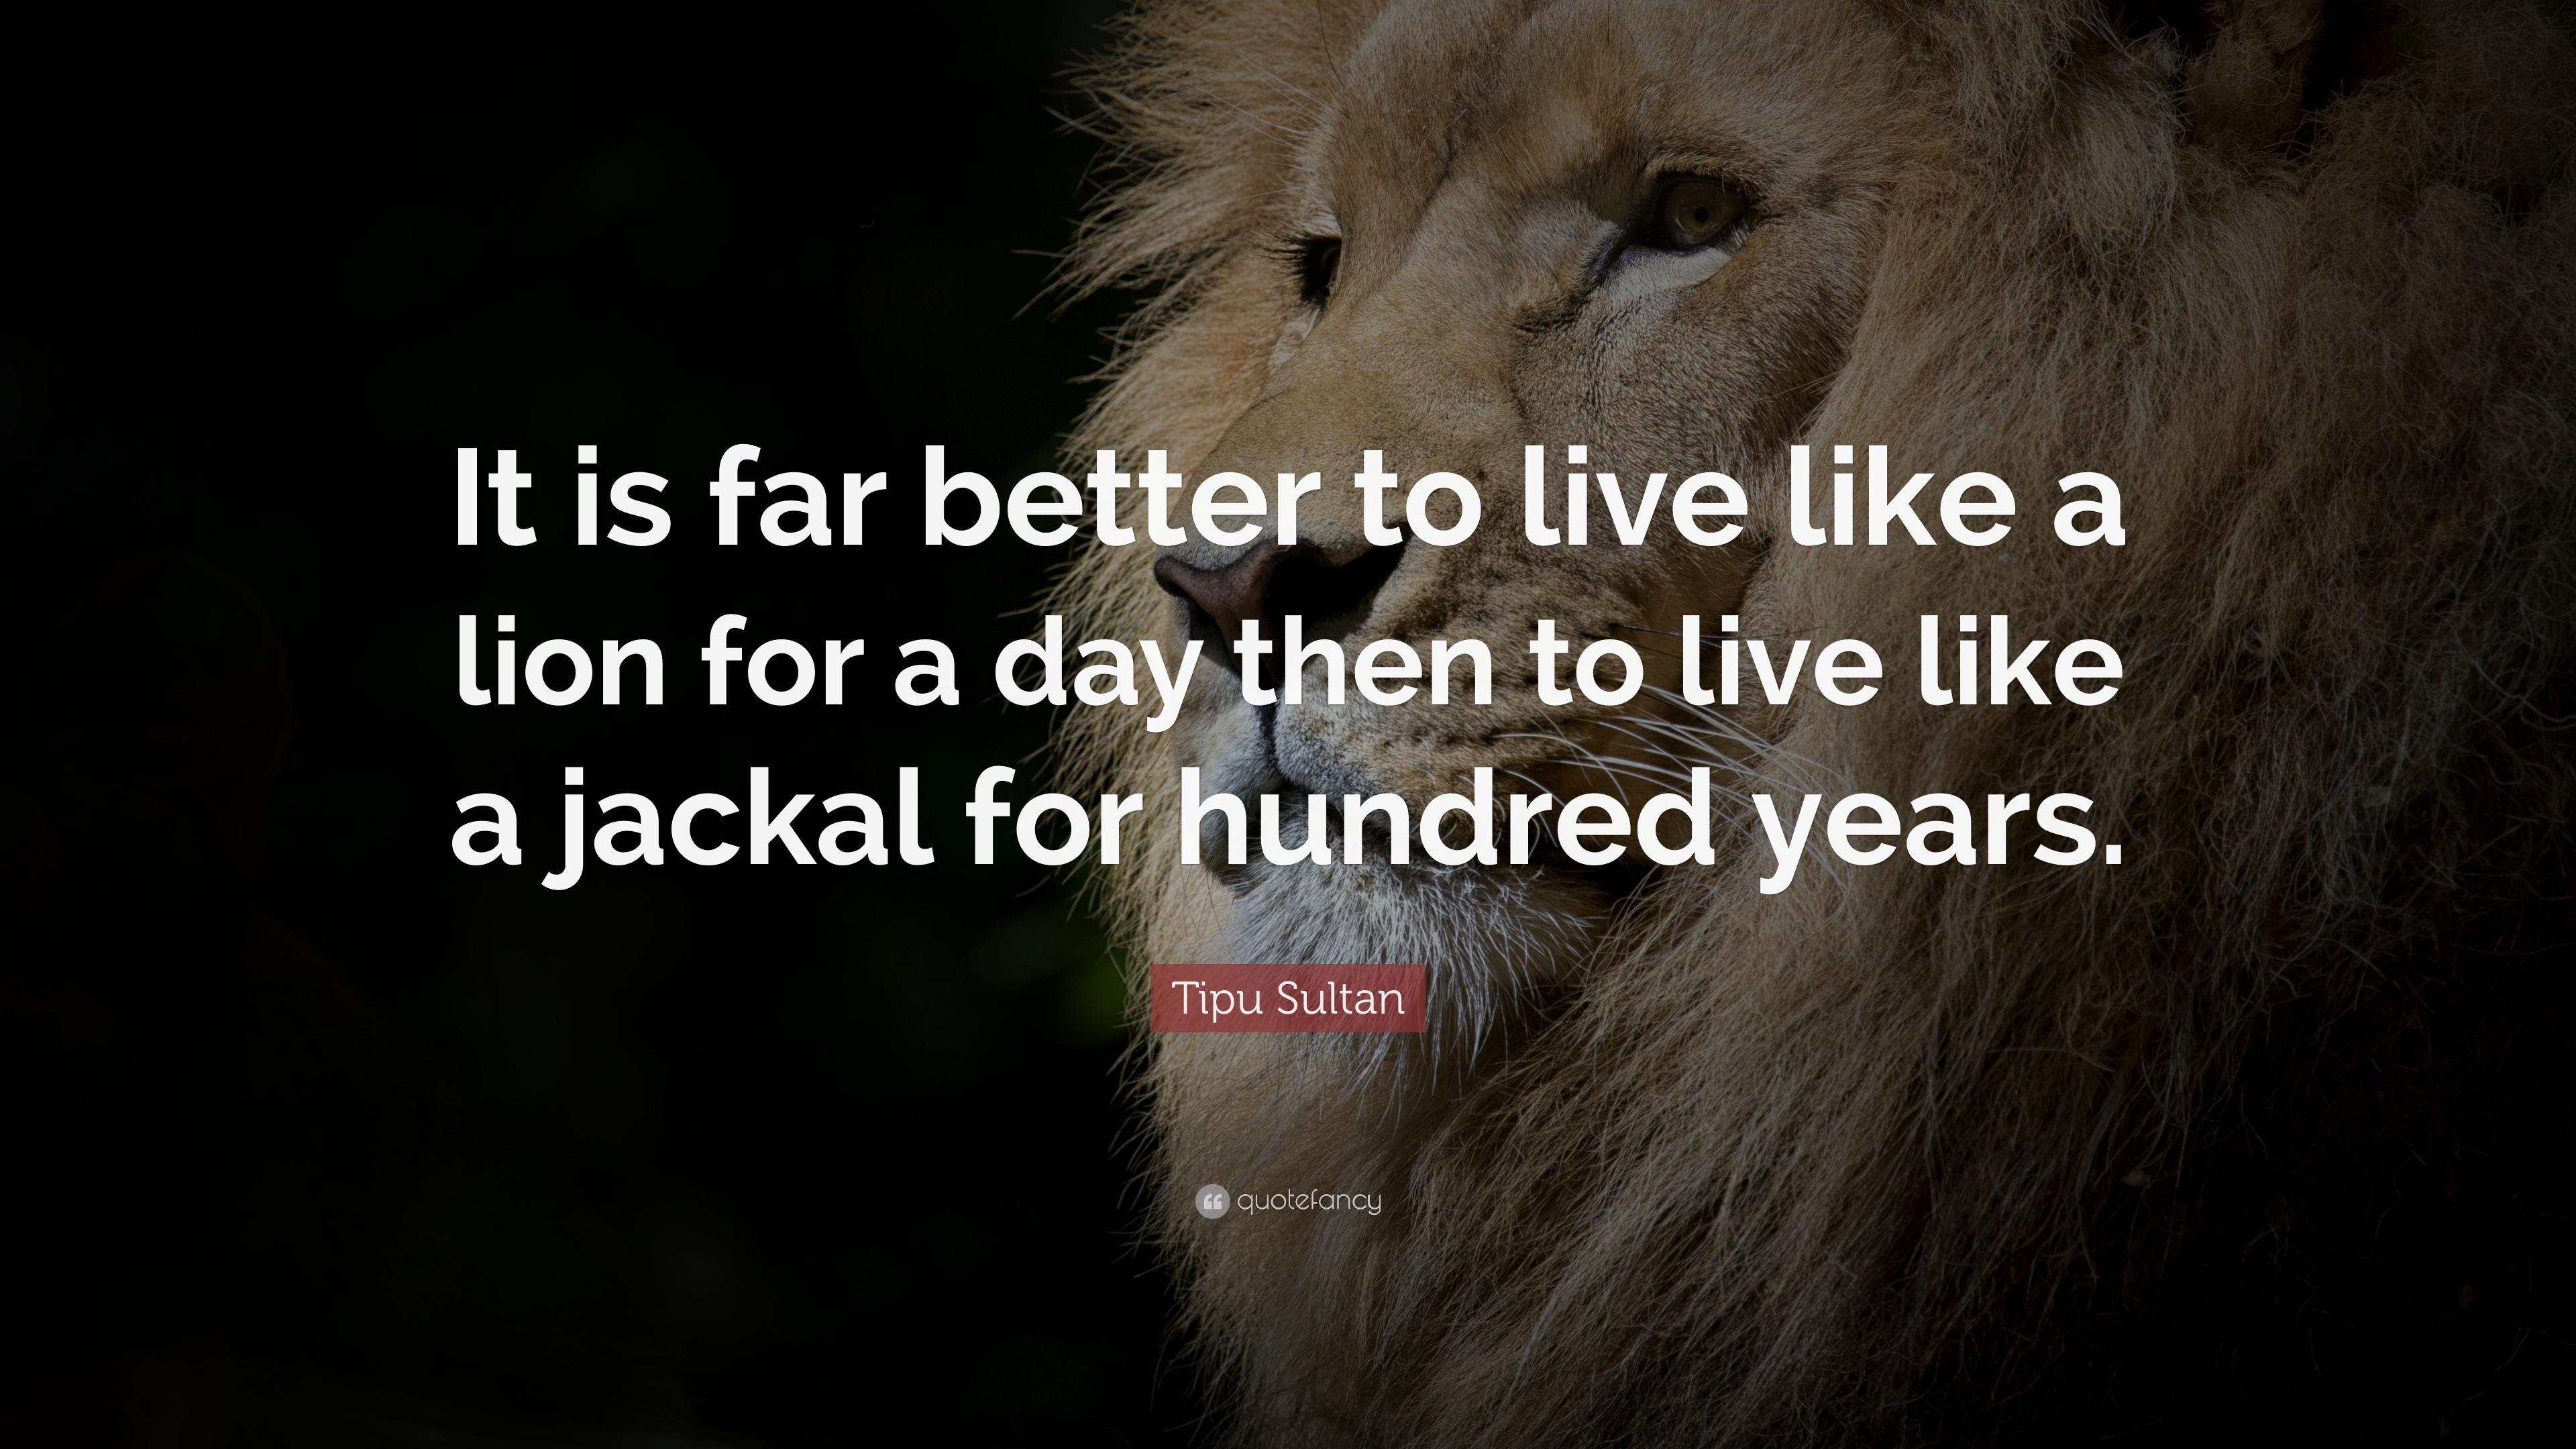 Tipu Sultan Quote: “It is far better to live like a lion for a day